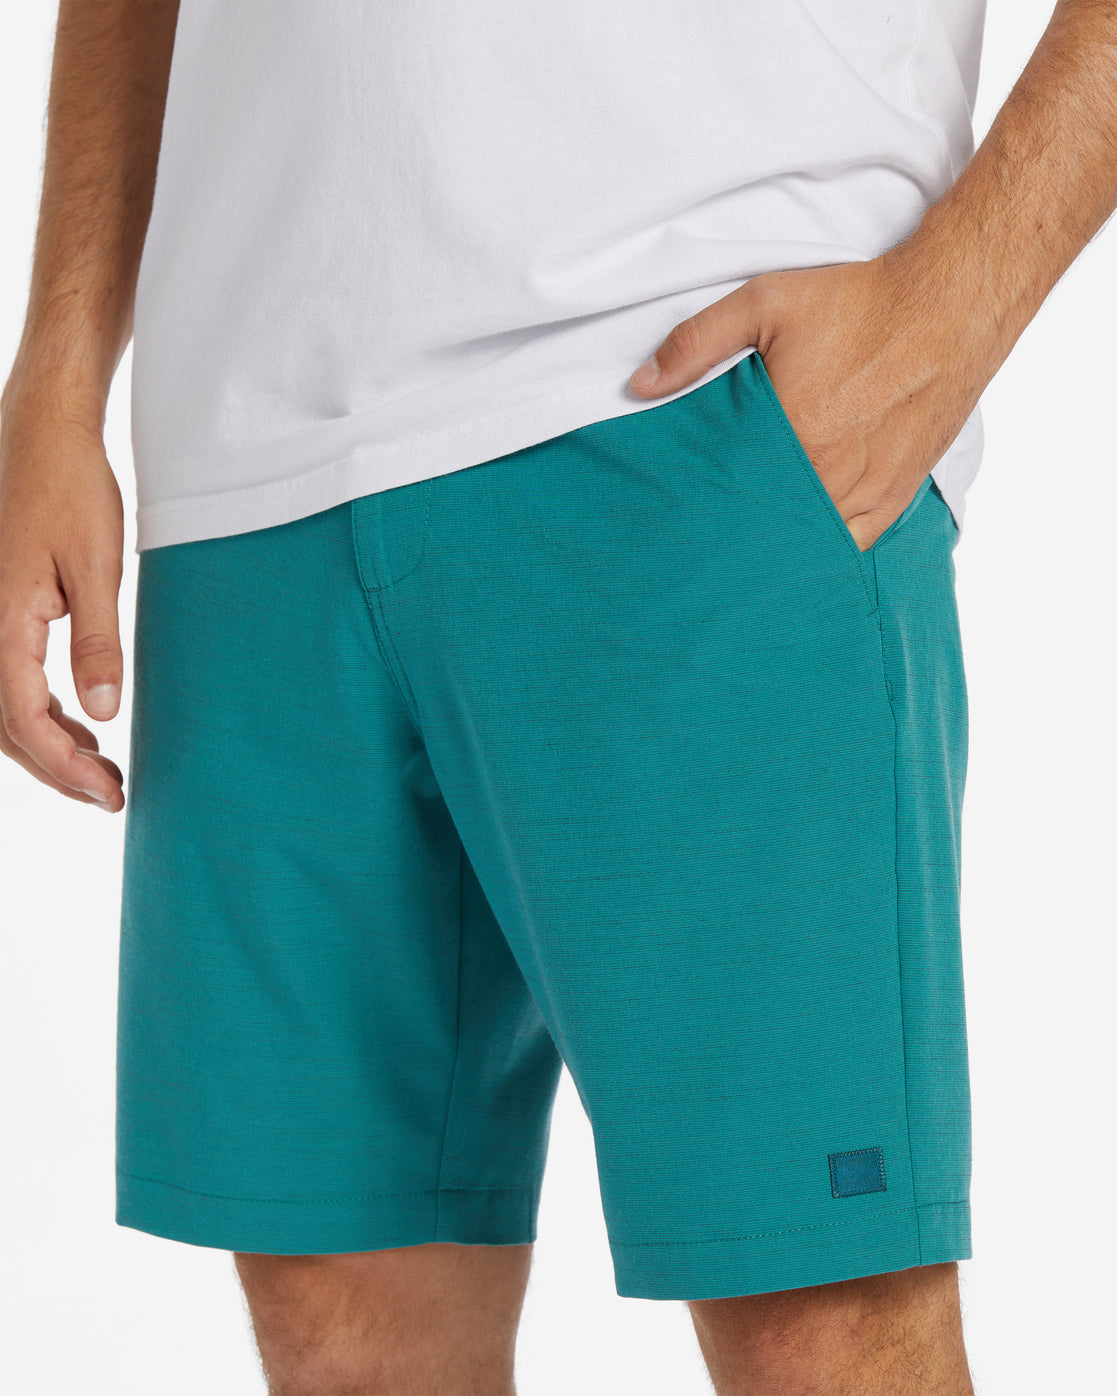 CROSSFIRE SHORTS - ABYWS00199